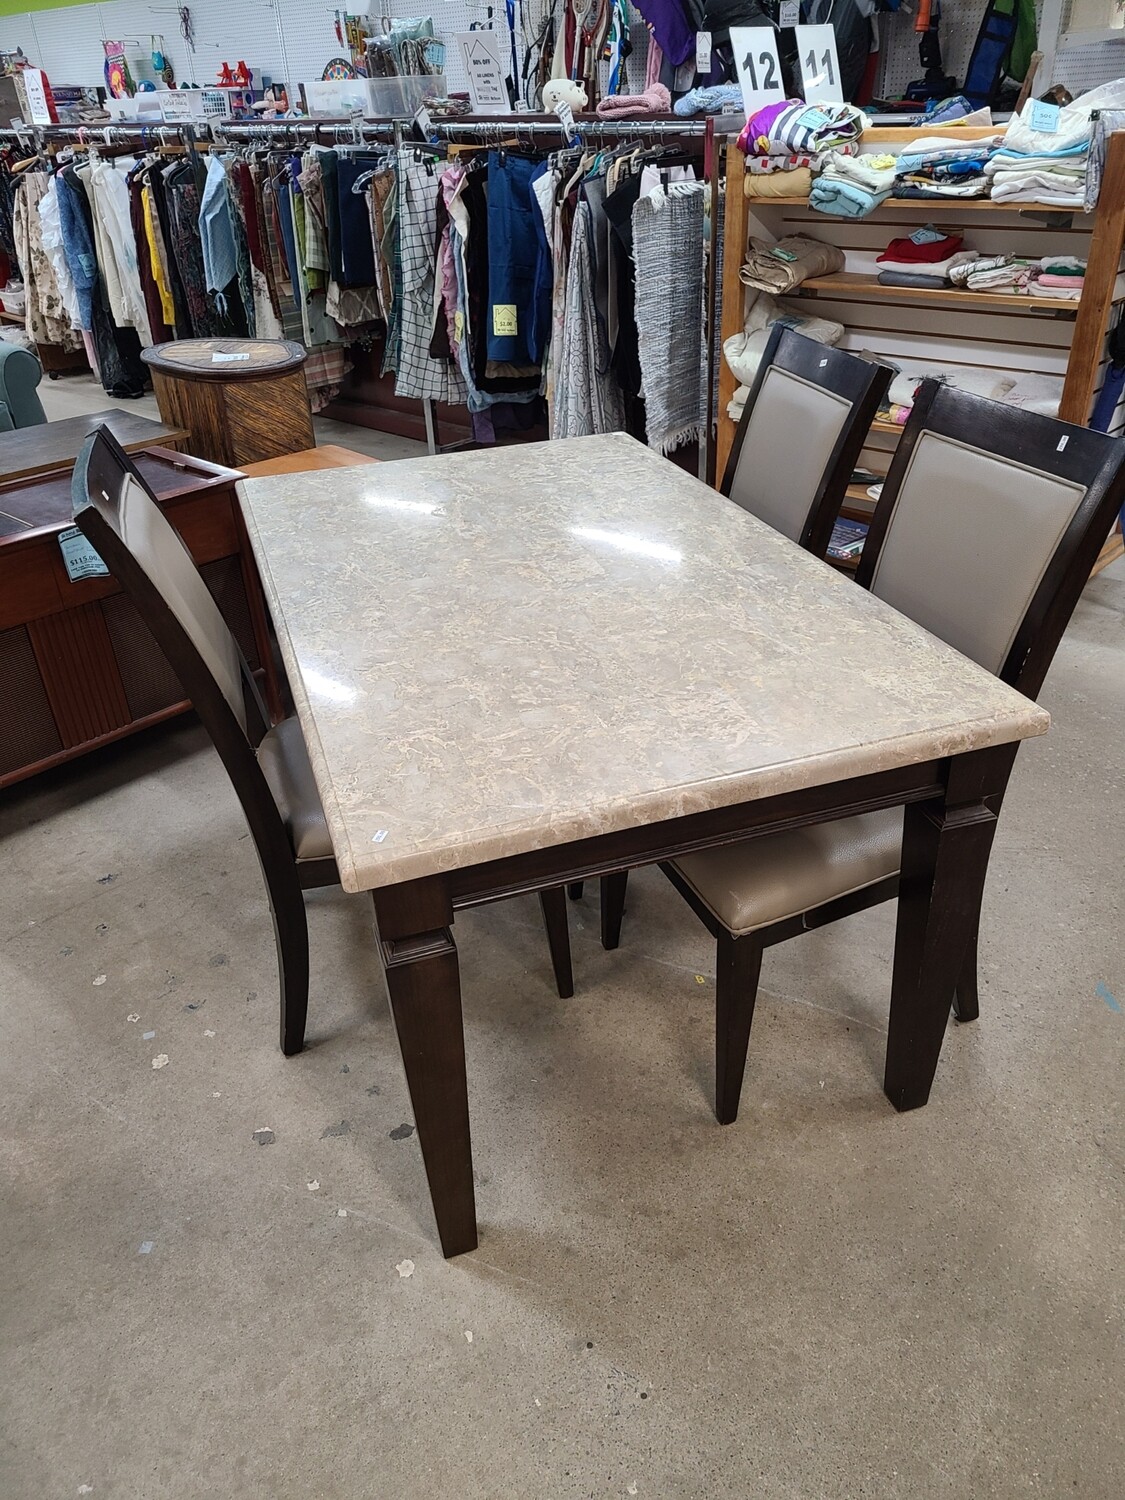 Quartz Top Table with 3 Chairs